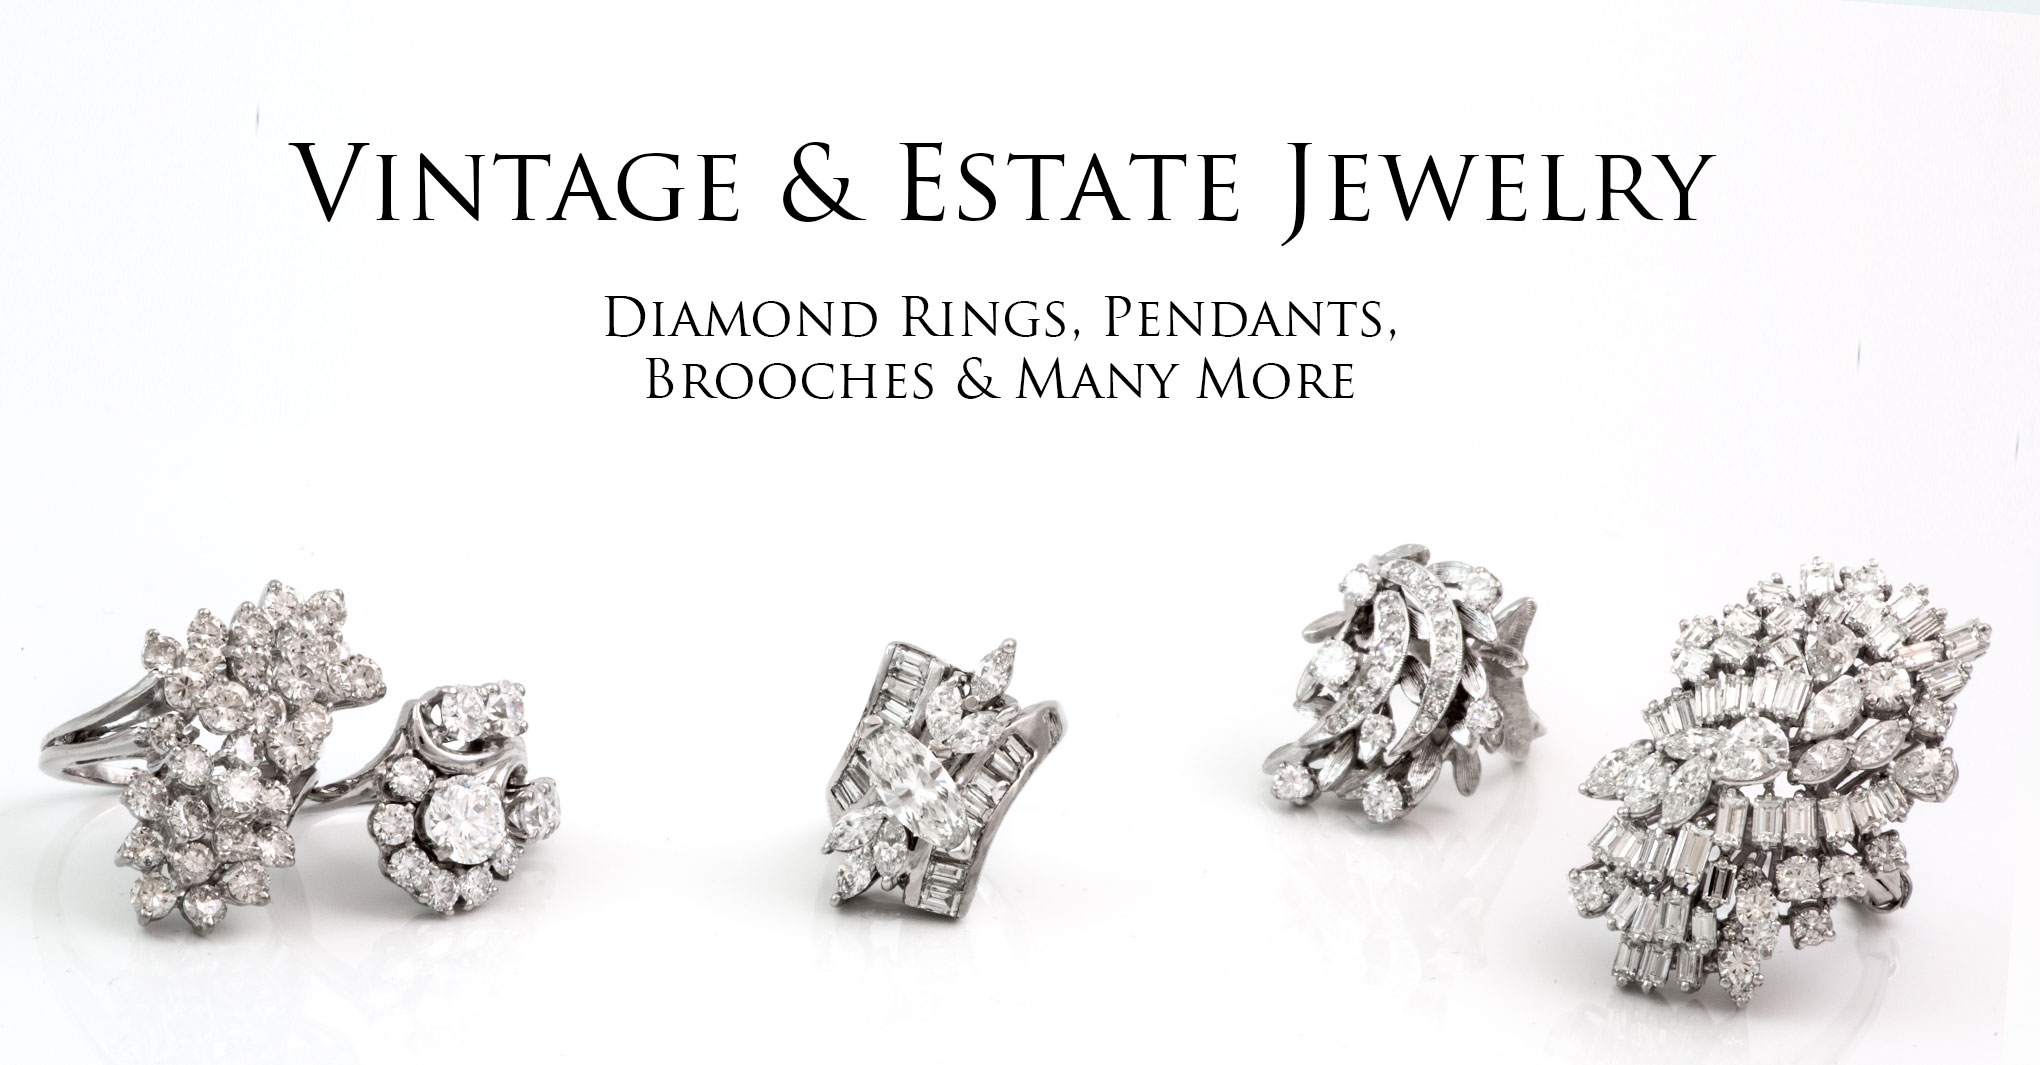 Vintage & Estate Jewelry - South Bay Gold Torrance